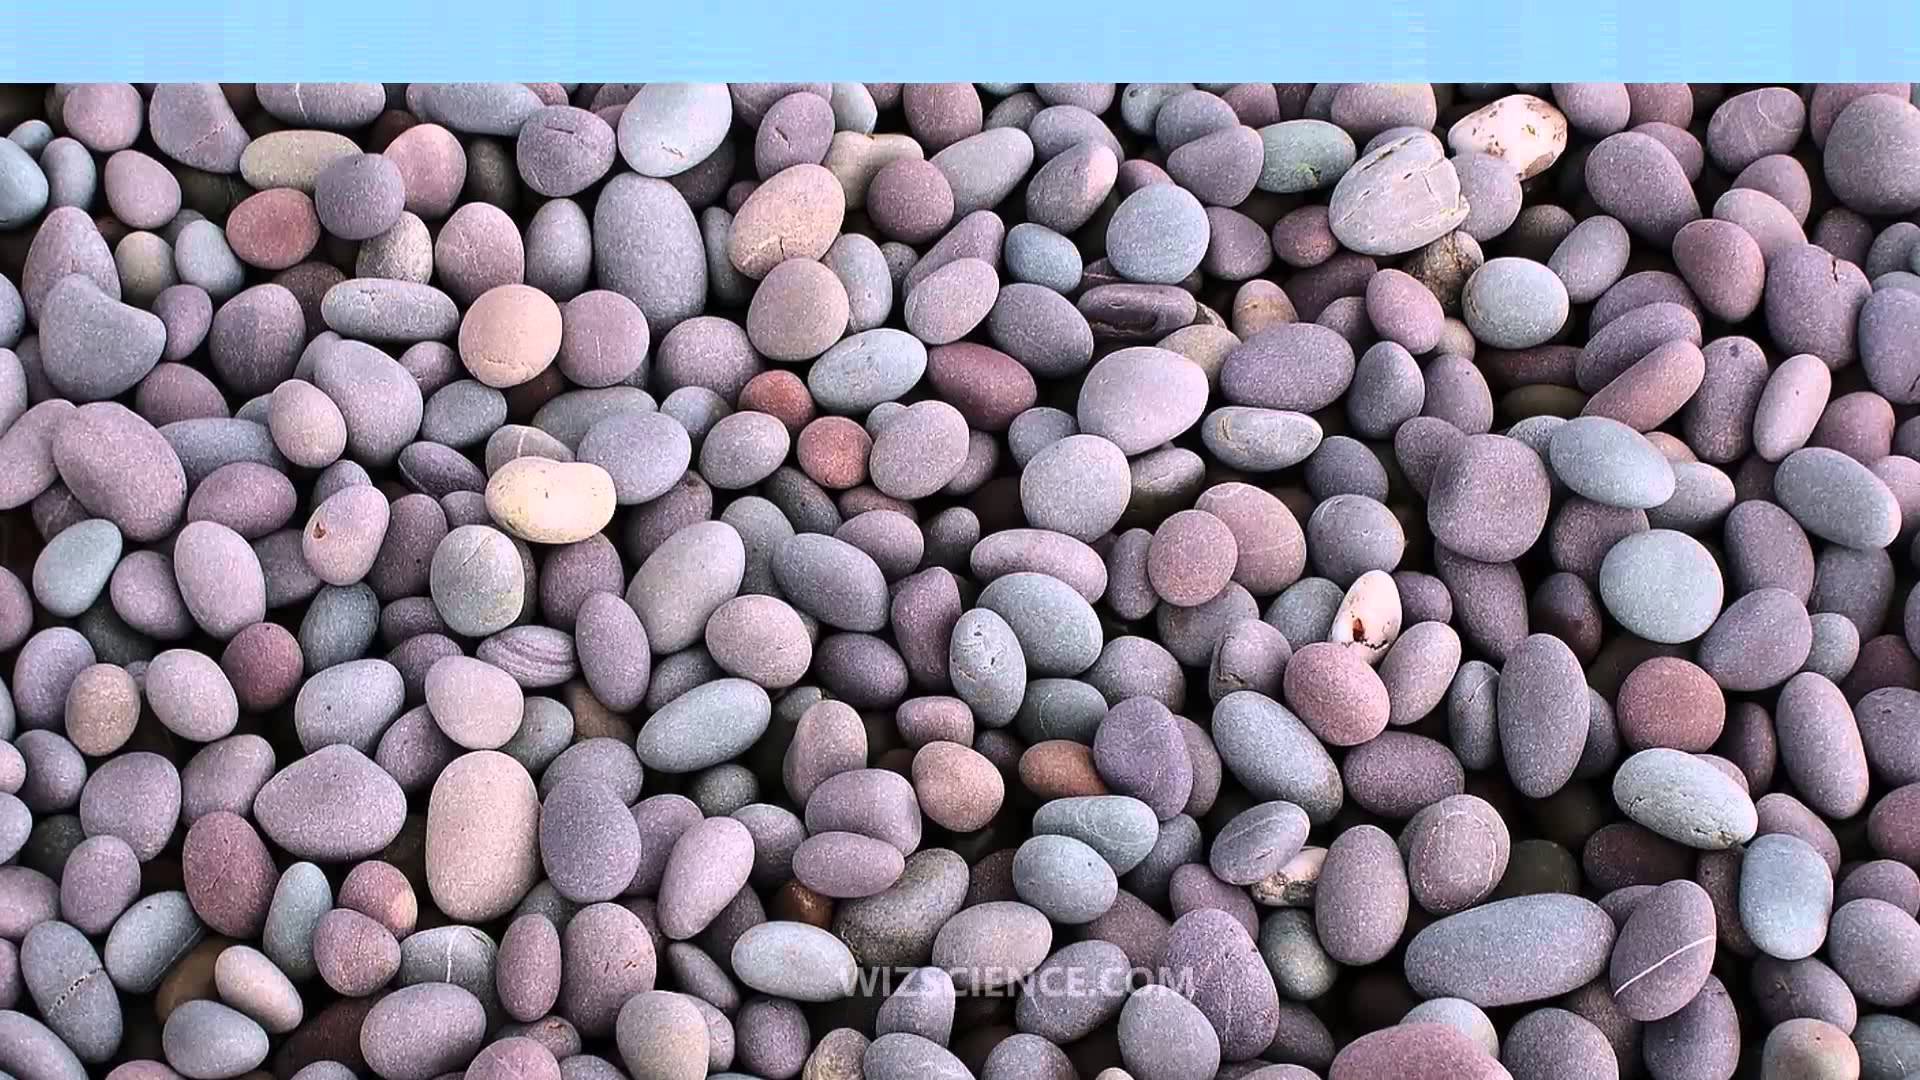 Pebble - Video Learning - WizScience.com - YouTube